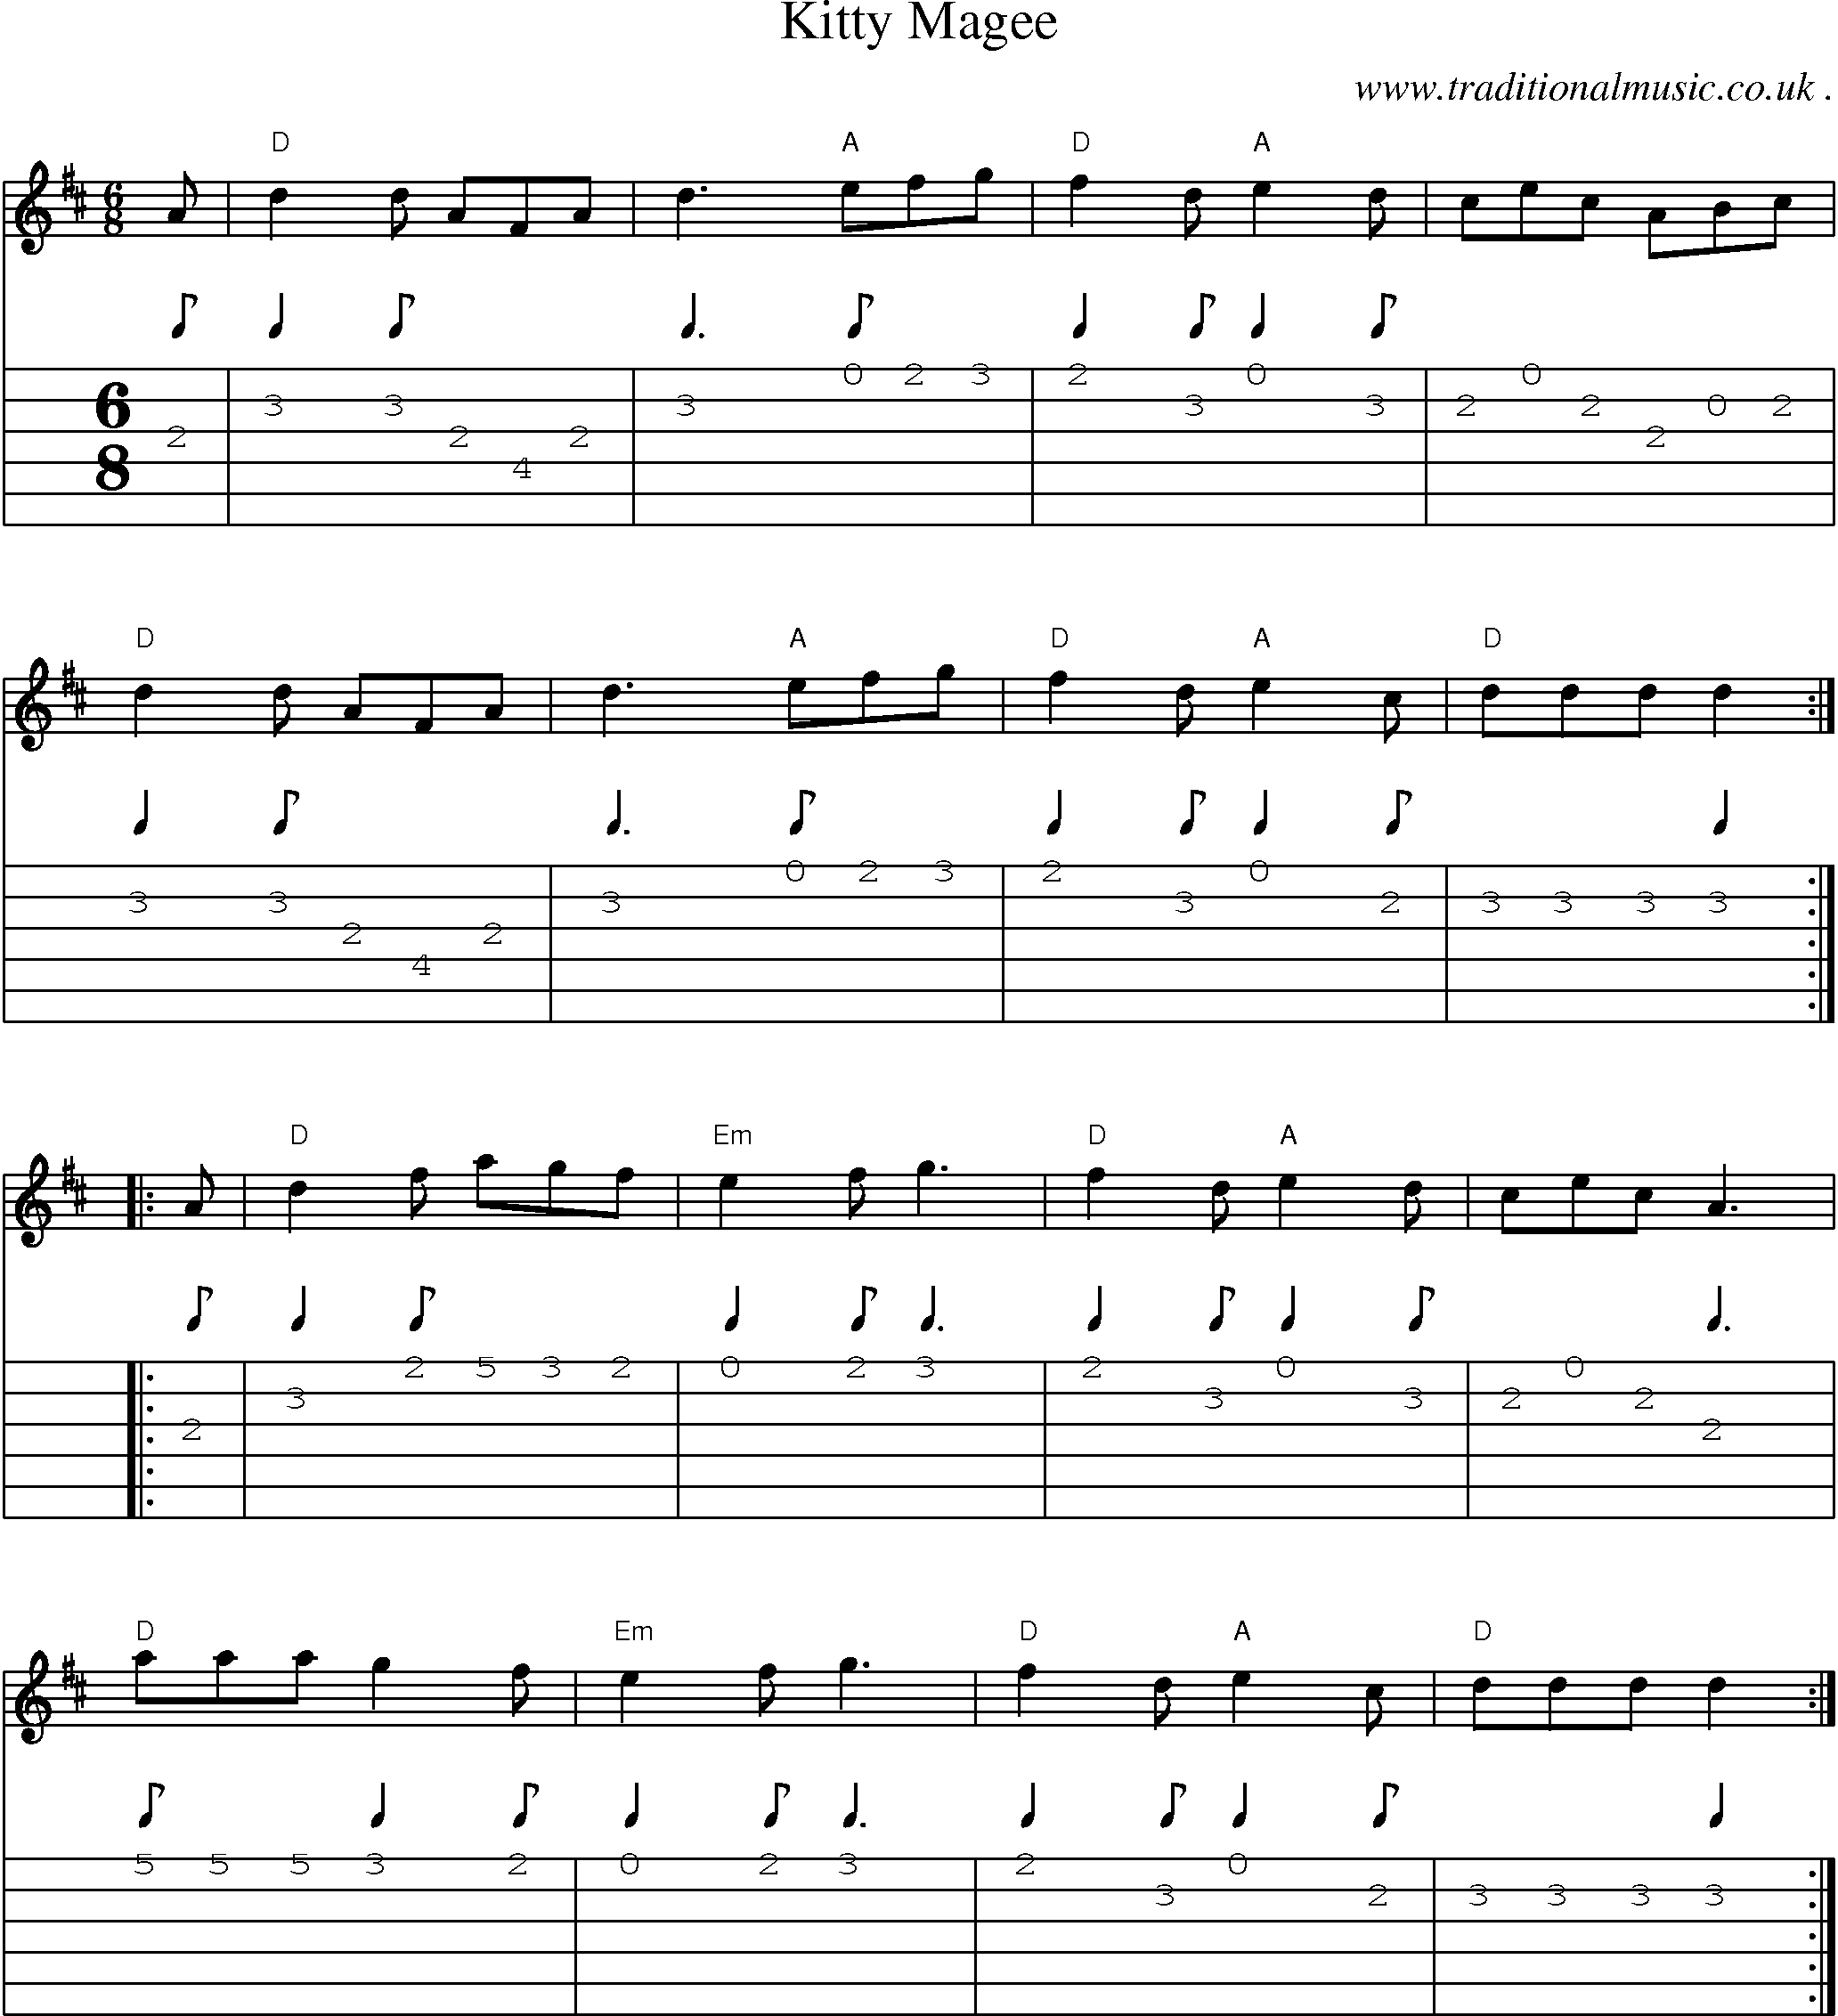 Music Score and Guitar Tabs for Kitty Magee